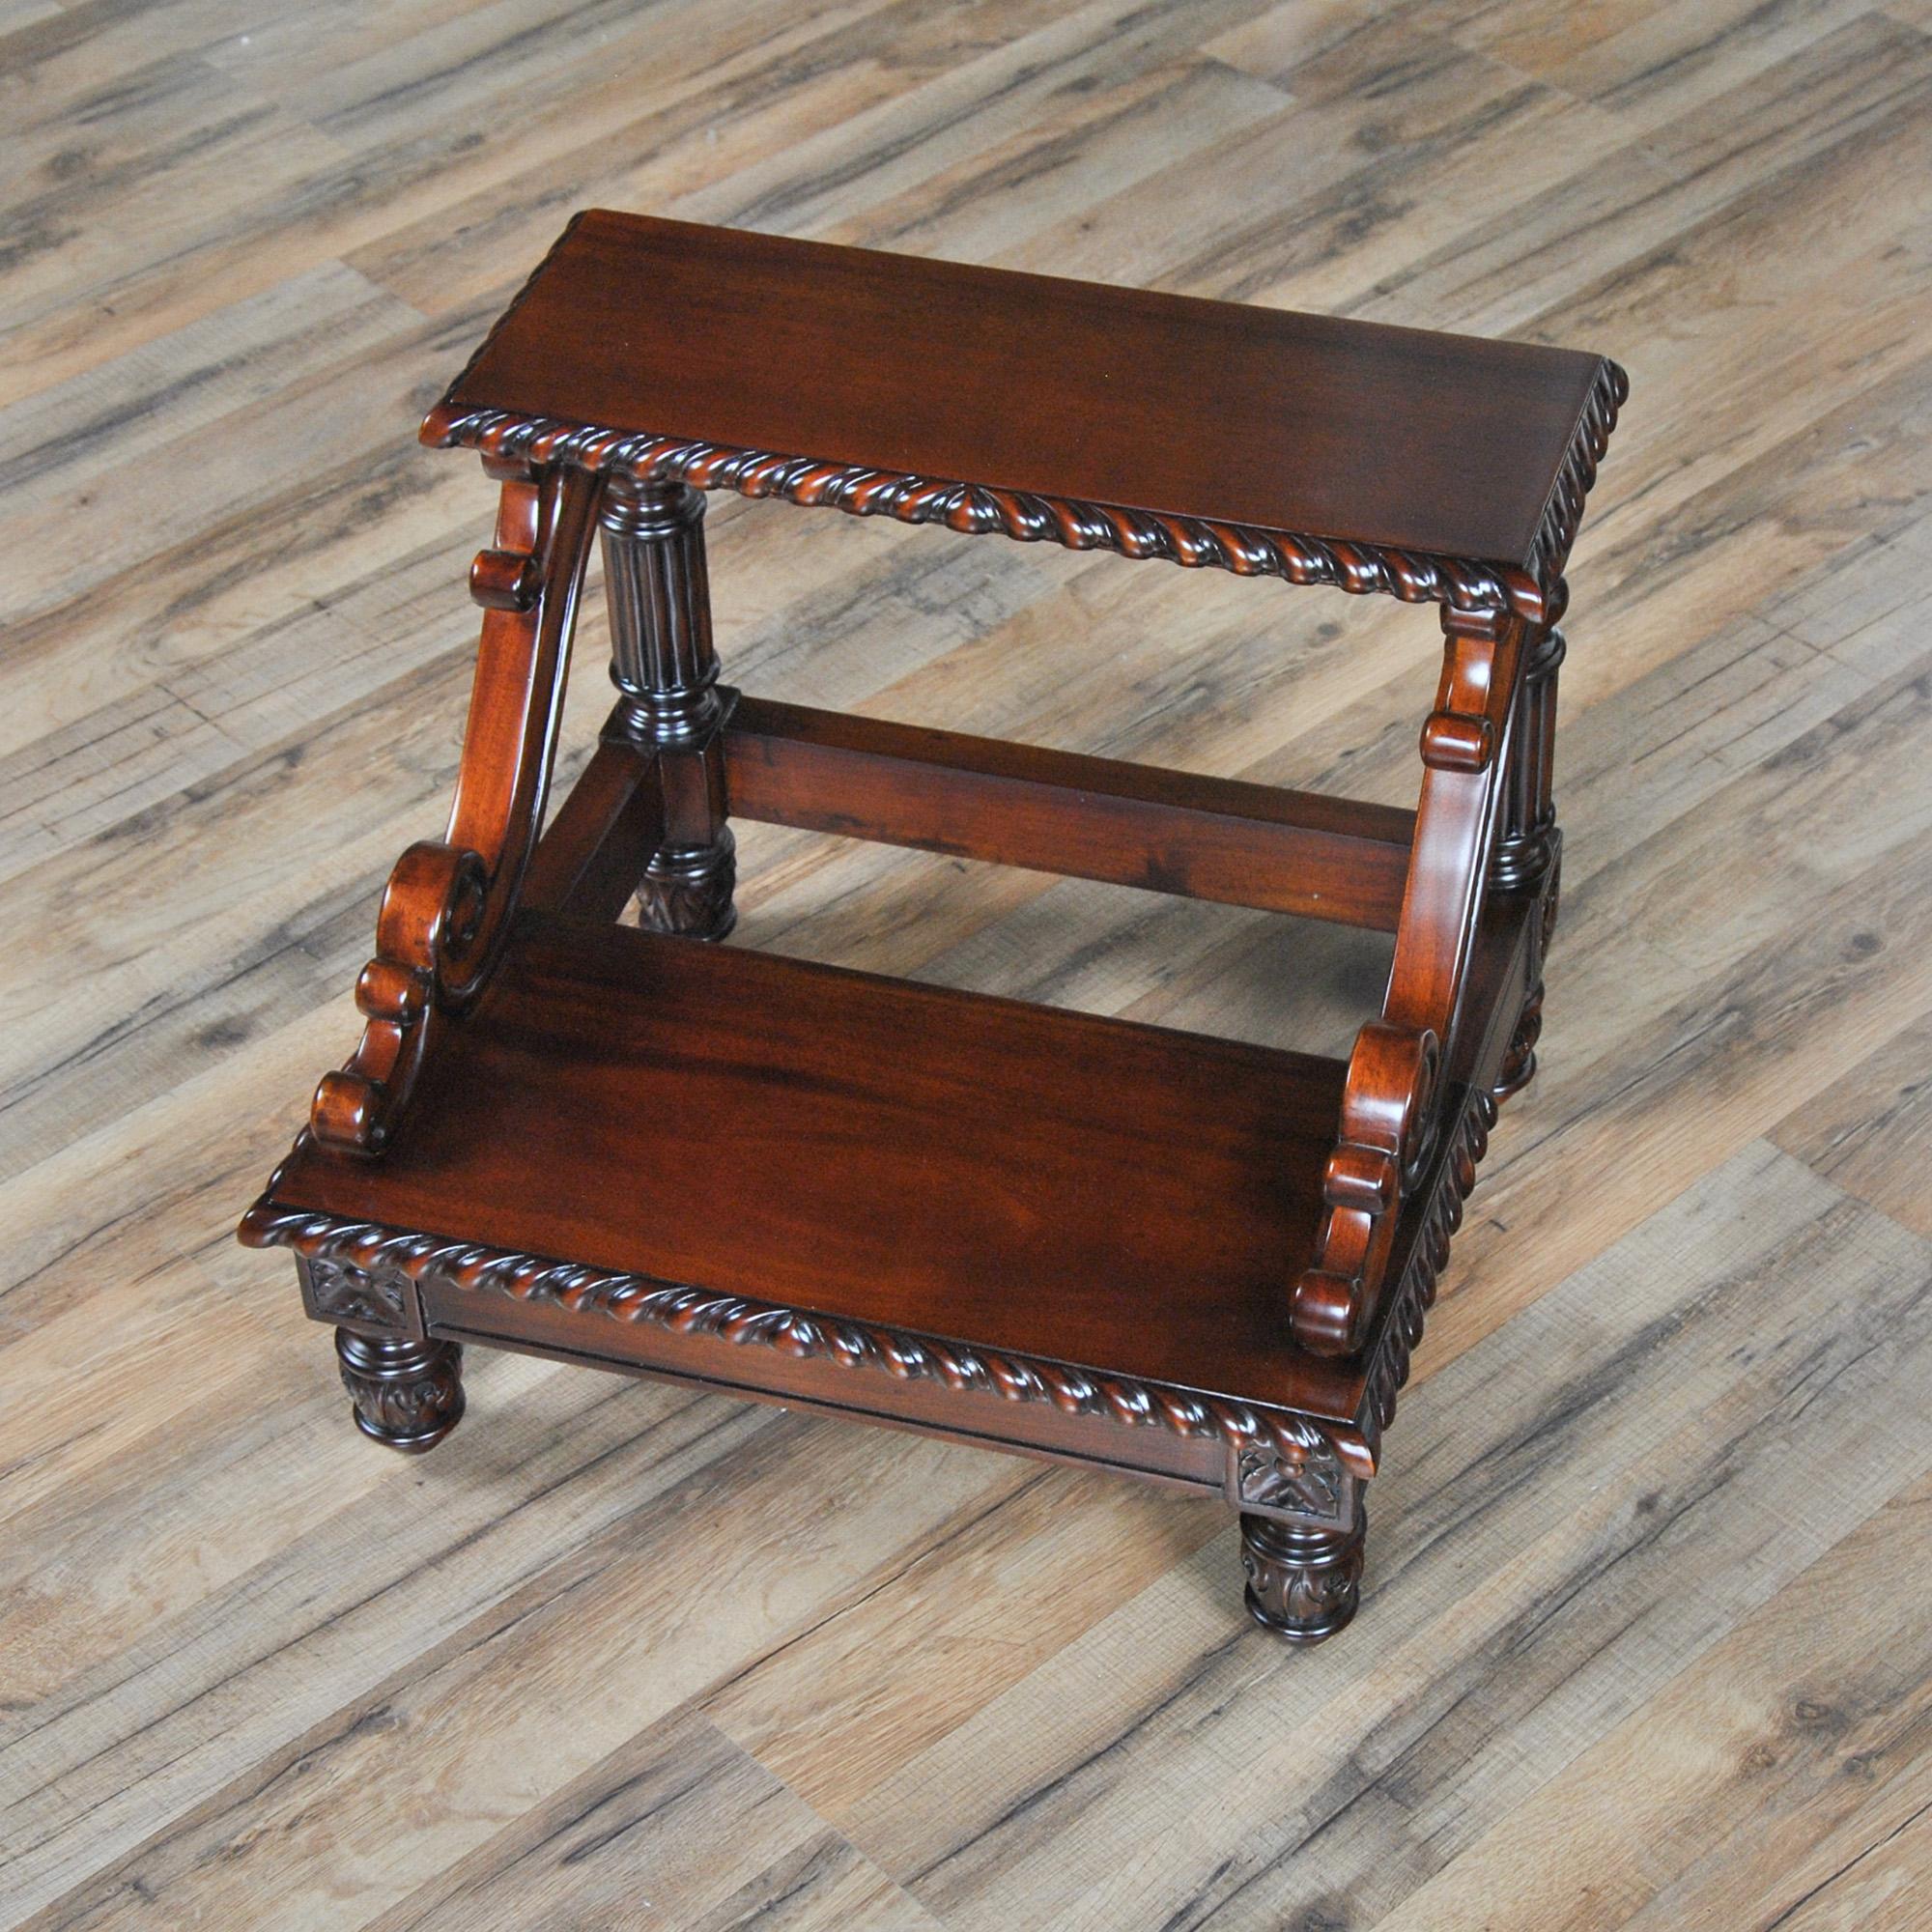 The Carved Mahogany Bed Step has simple and tasteful style, practical and elegant details are all combined with great quality construction to make a this high quality piece of furniture. The Carved Mahogany Bed Step is the perfect size for helping